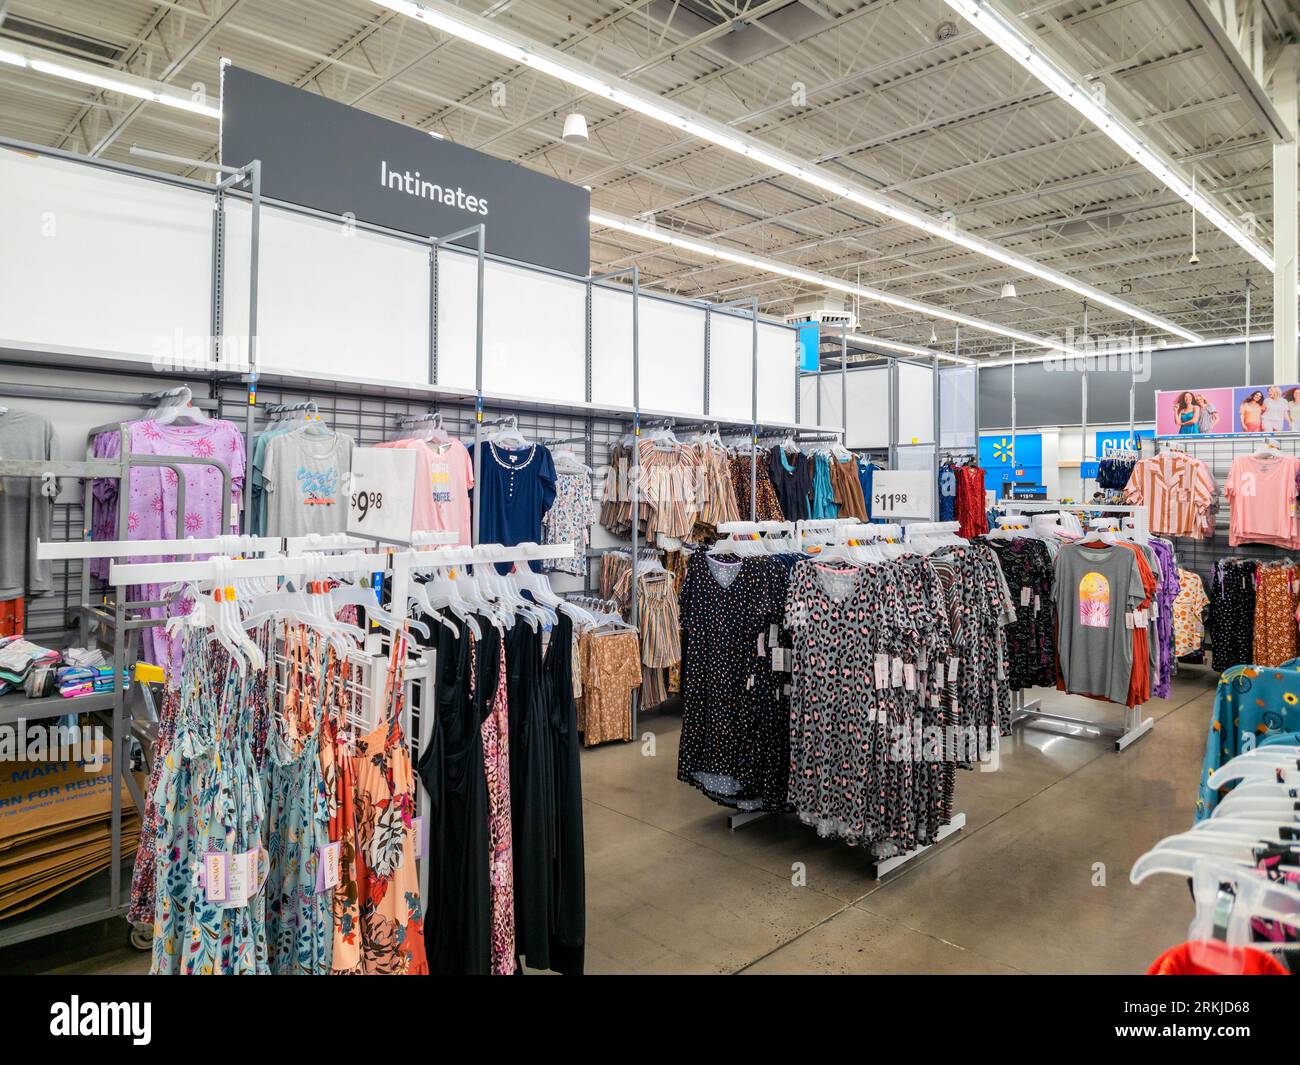 New Hartford, New York - Aug 22, 2023: Close-up View of Intimates Section of the Women's Clothes Department Walmart Super Center. Stock Photo